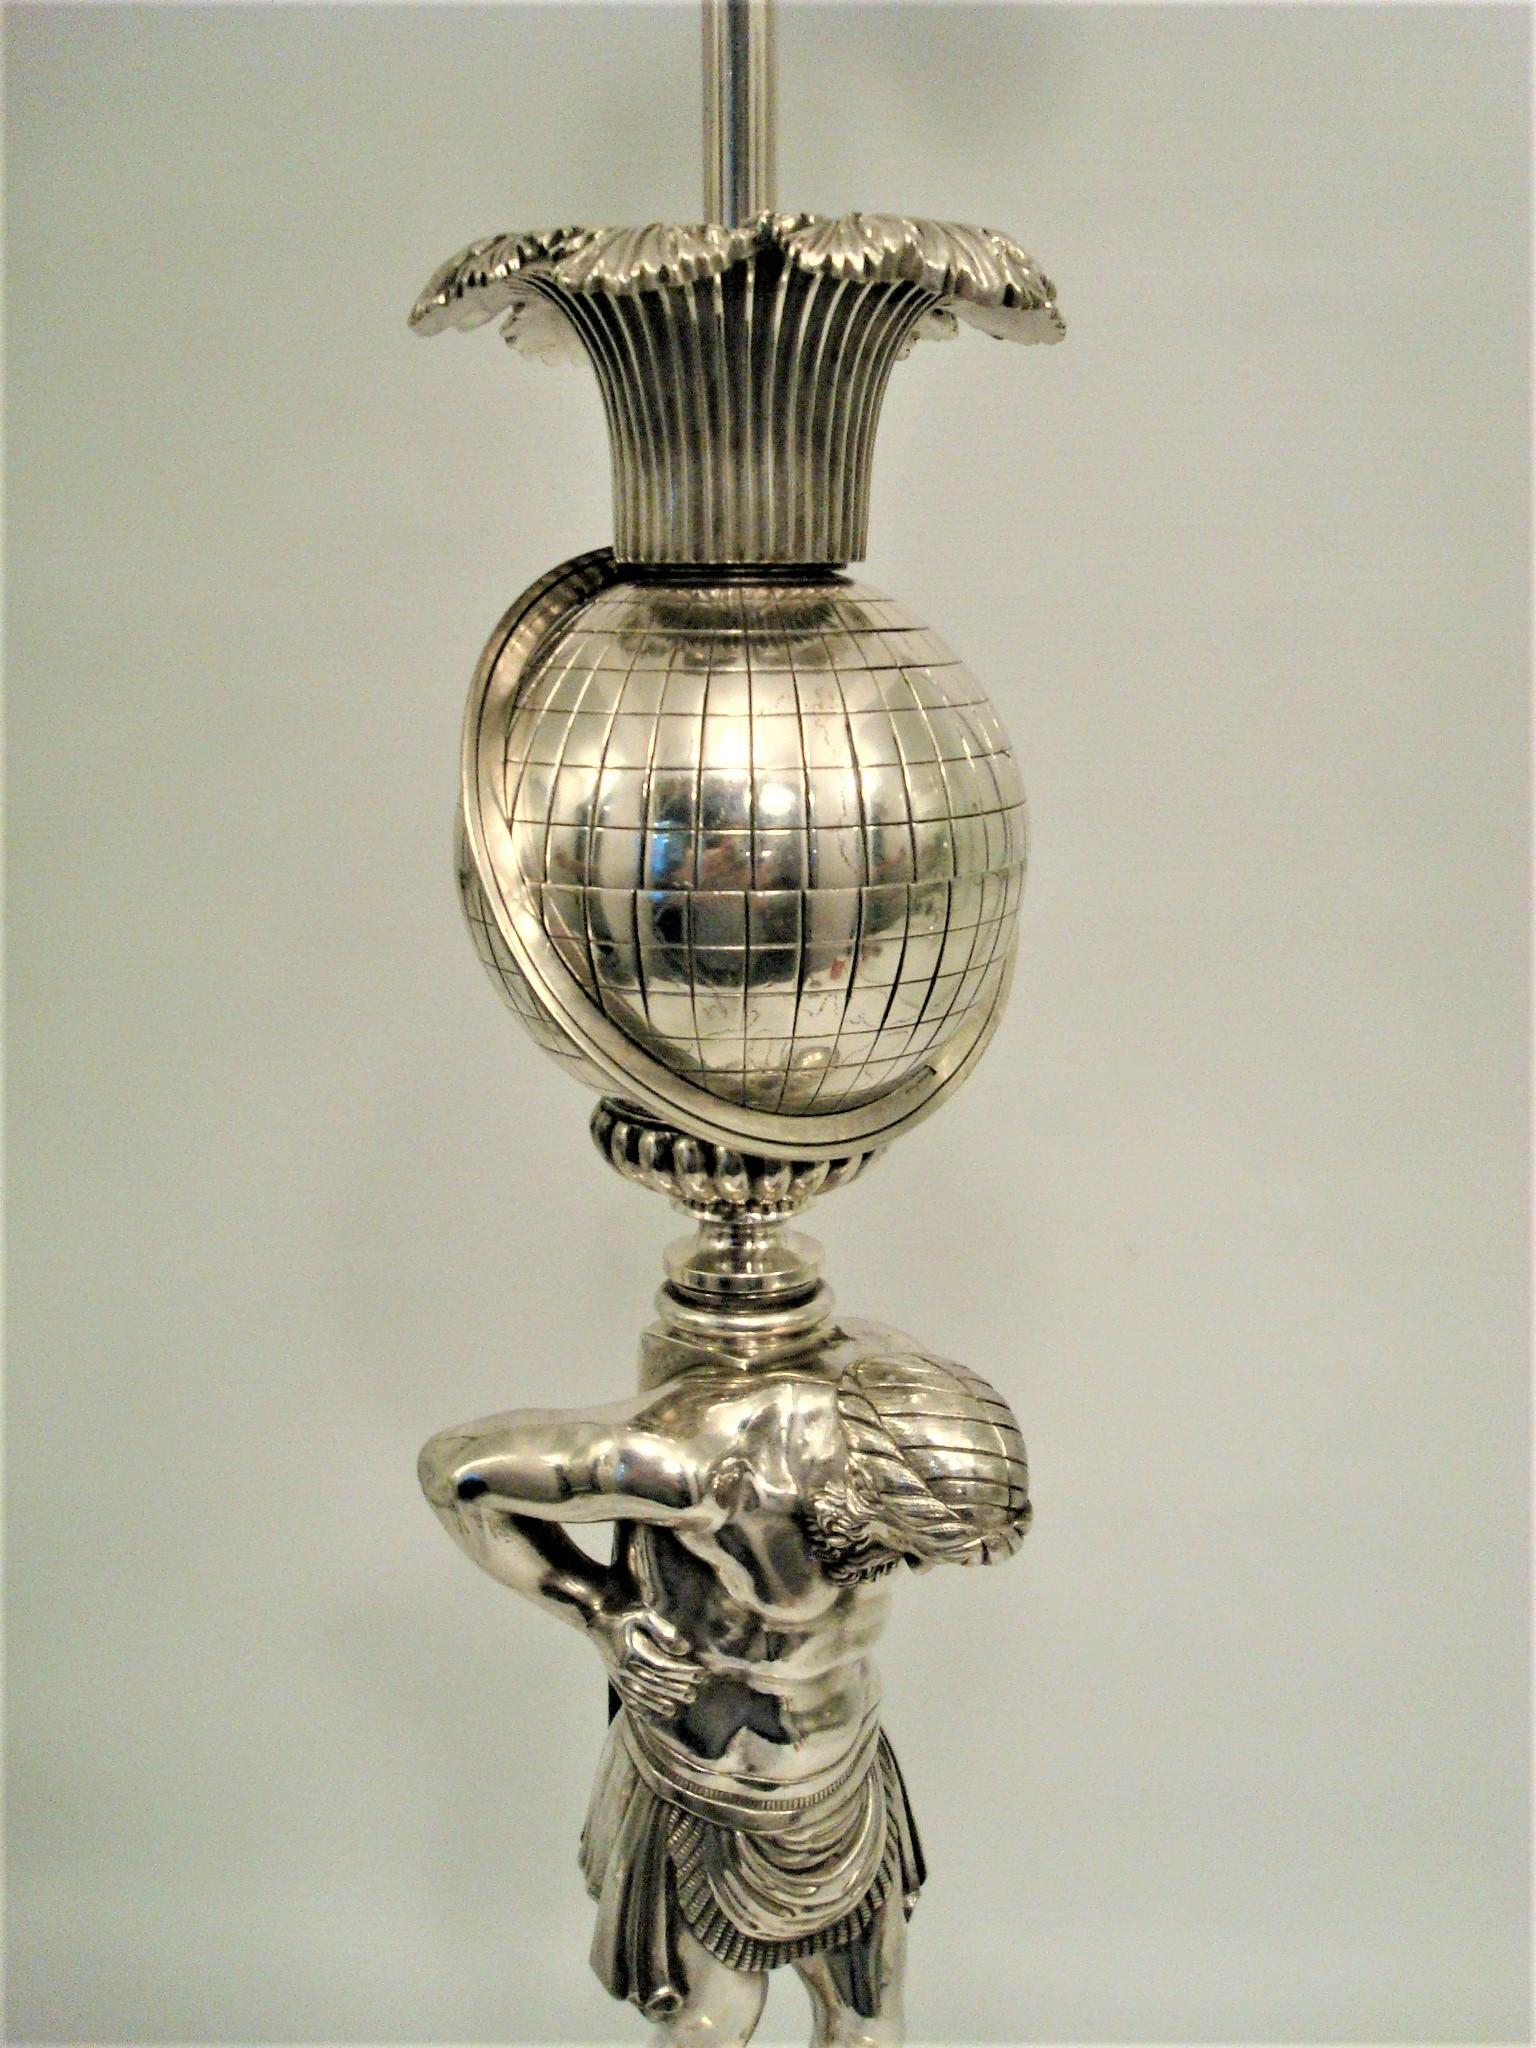 Silvered Thomas Messenger and Sons 'Atlas' Sculpture Bronze Lamp Base, England circa 1835 For Sale